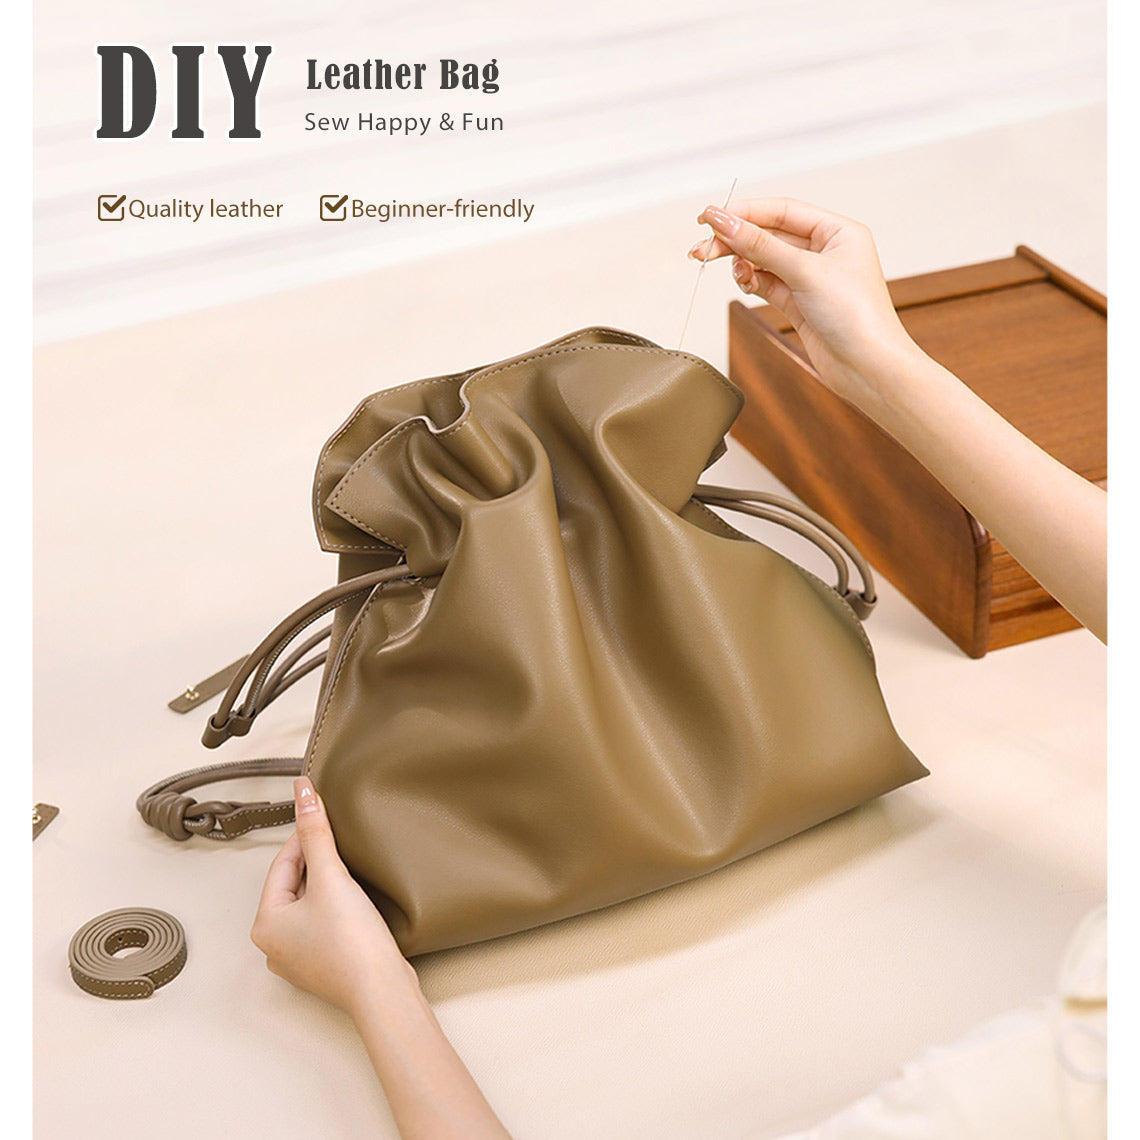 DIY Leather Bag Kit for Beginners | Bag Making Project for Home - POPSEWING®